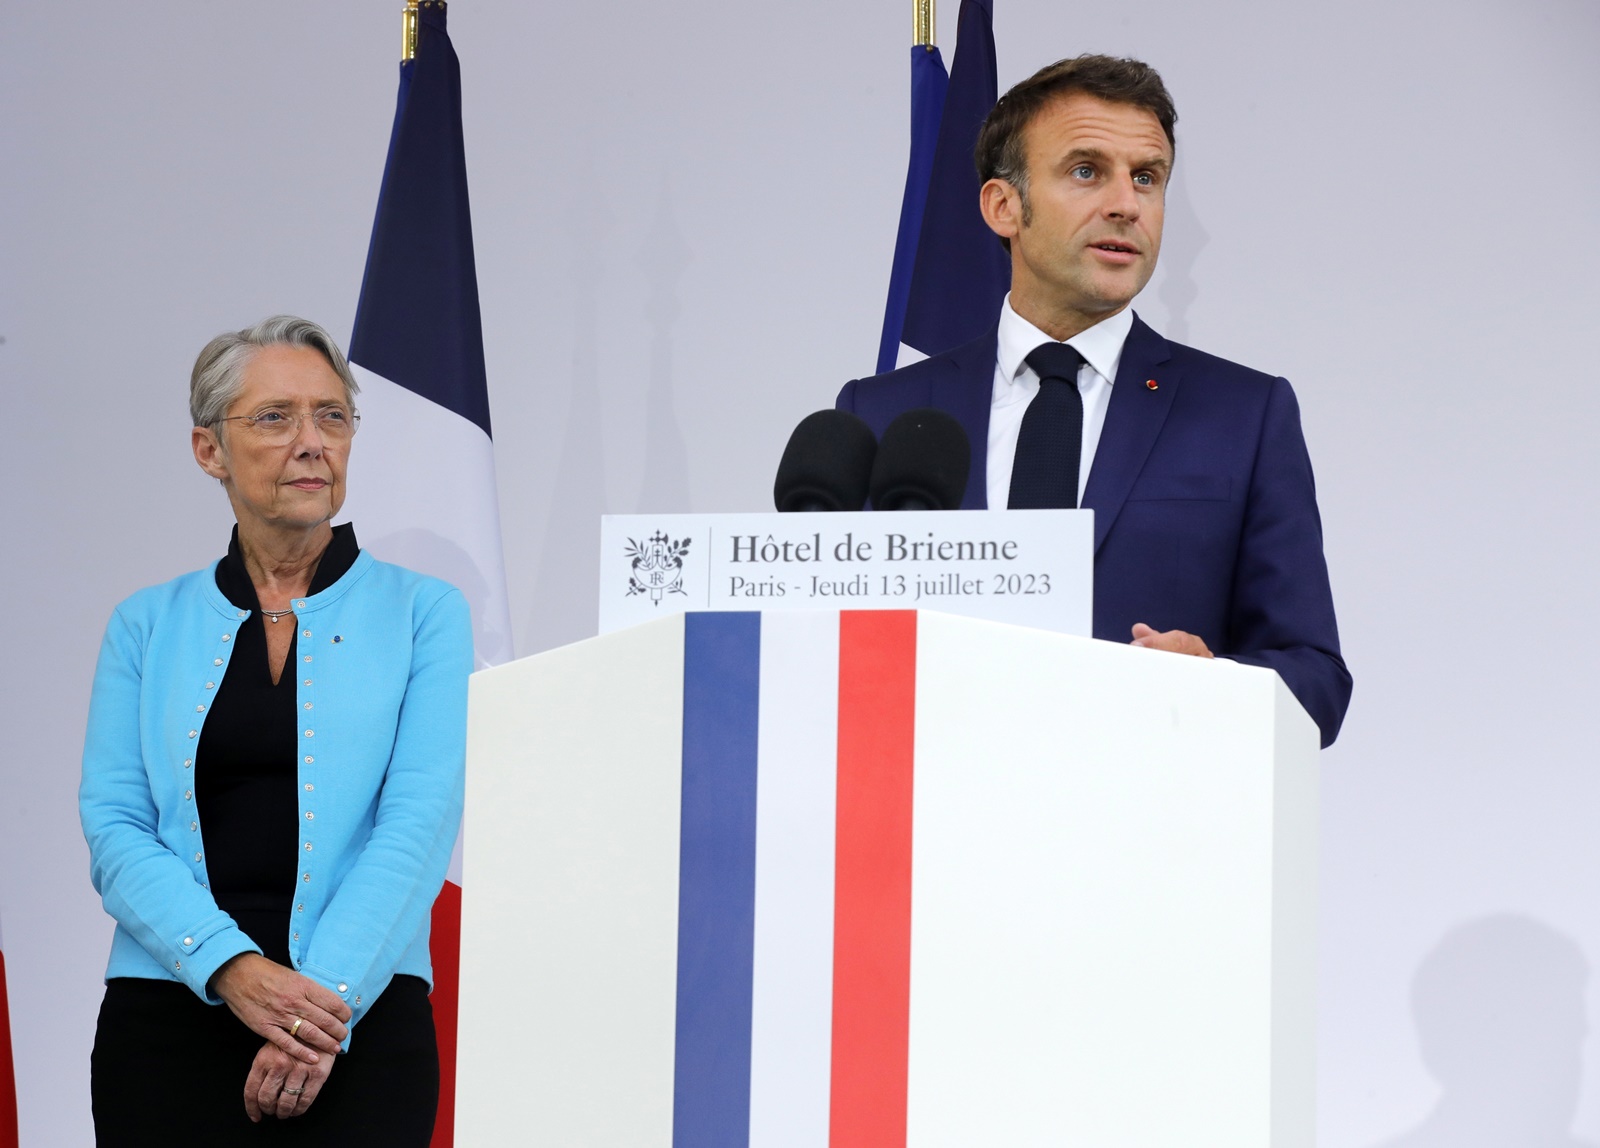 epa11064821 (FILE) - French President Emmanuel Macron (R) flanked by Prime Minister Elisabeth Borne (L) delivers his speech to military staff on the eve of Bastille Day, at the Defense Minister's residence in Paris, France, 13 July 2023 (reissued 08 January 2024). French Prime Minister Elisabeth Borne presented her resignation on 08 January 2024 to French President Emmanuel Macron, who accepted it, the French government announced in a statement.  EPA/TERESA SUAREZ